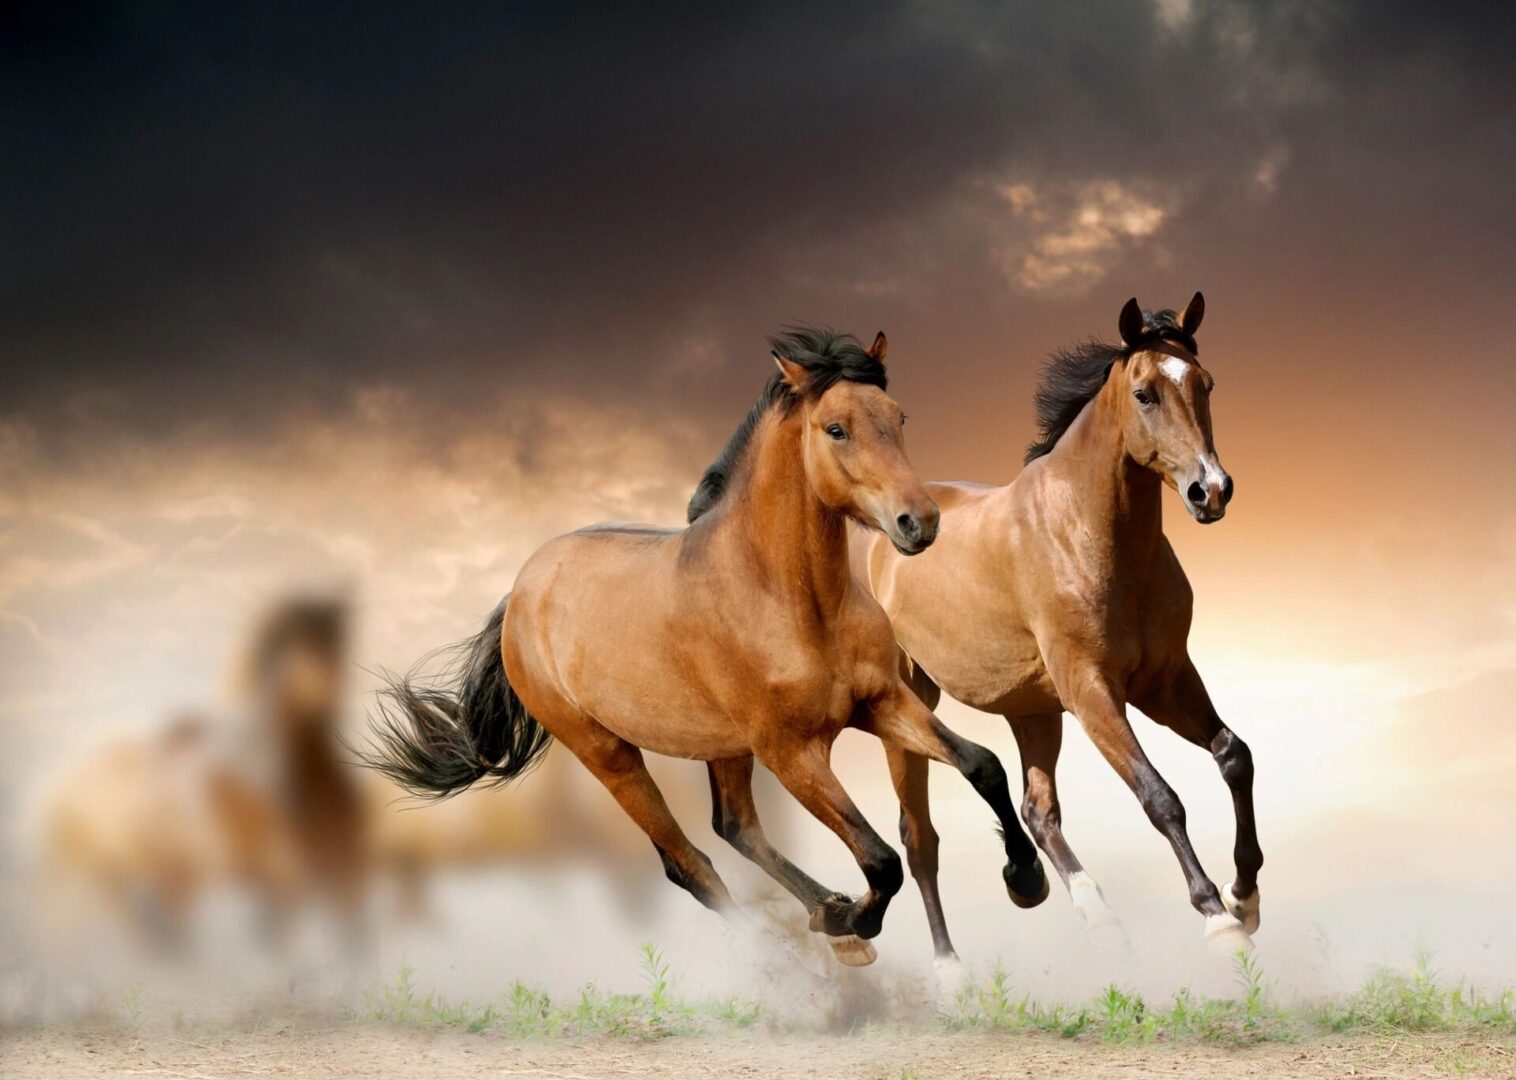 Two horses running in the grass with a cloudy sky behind them.